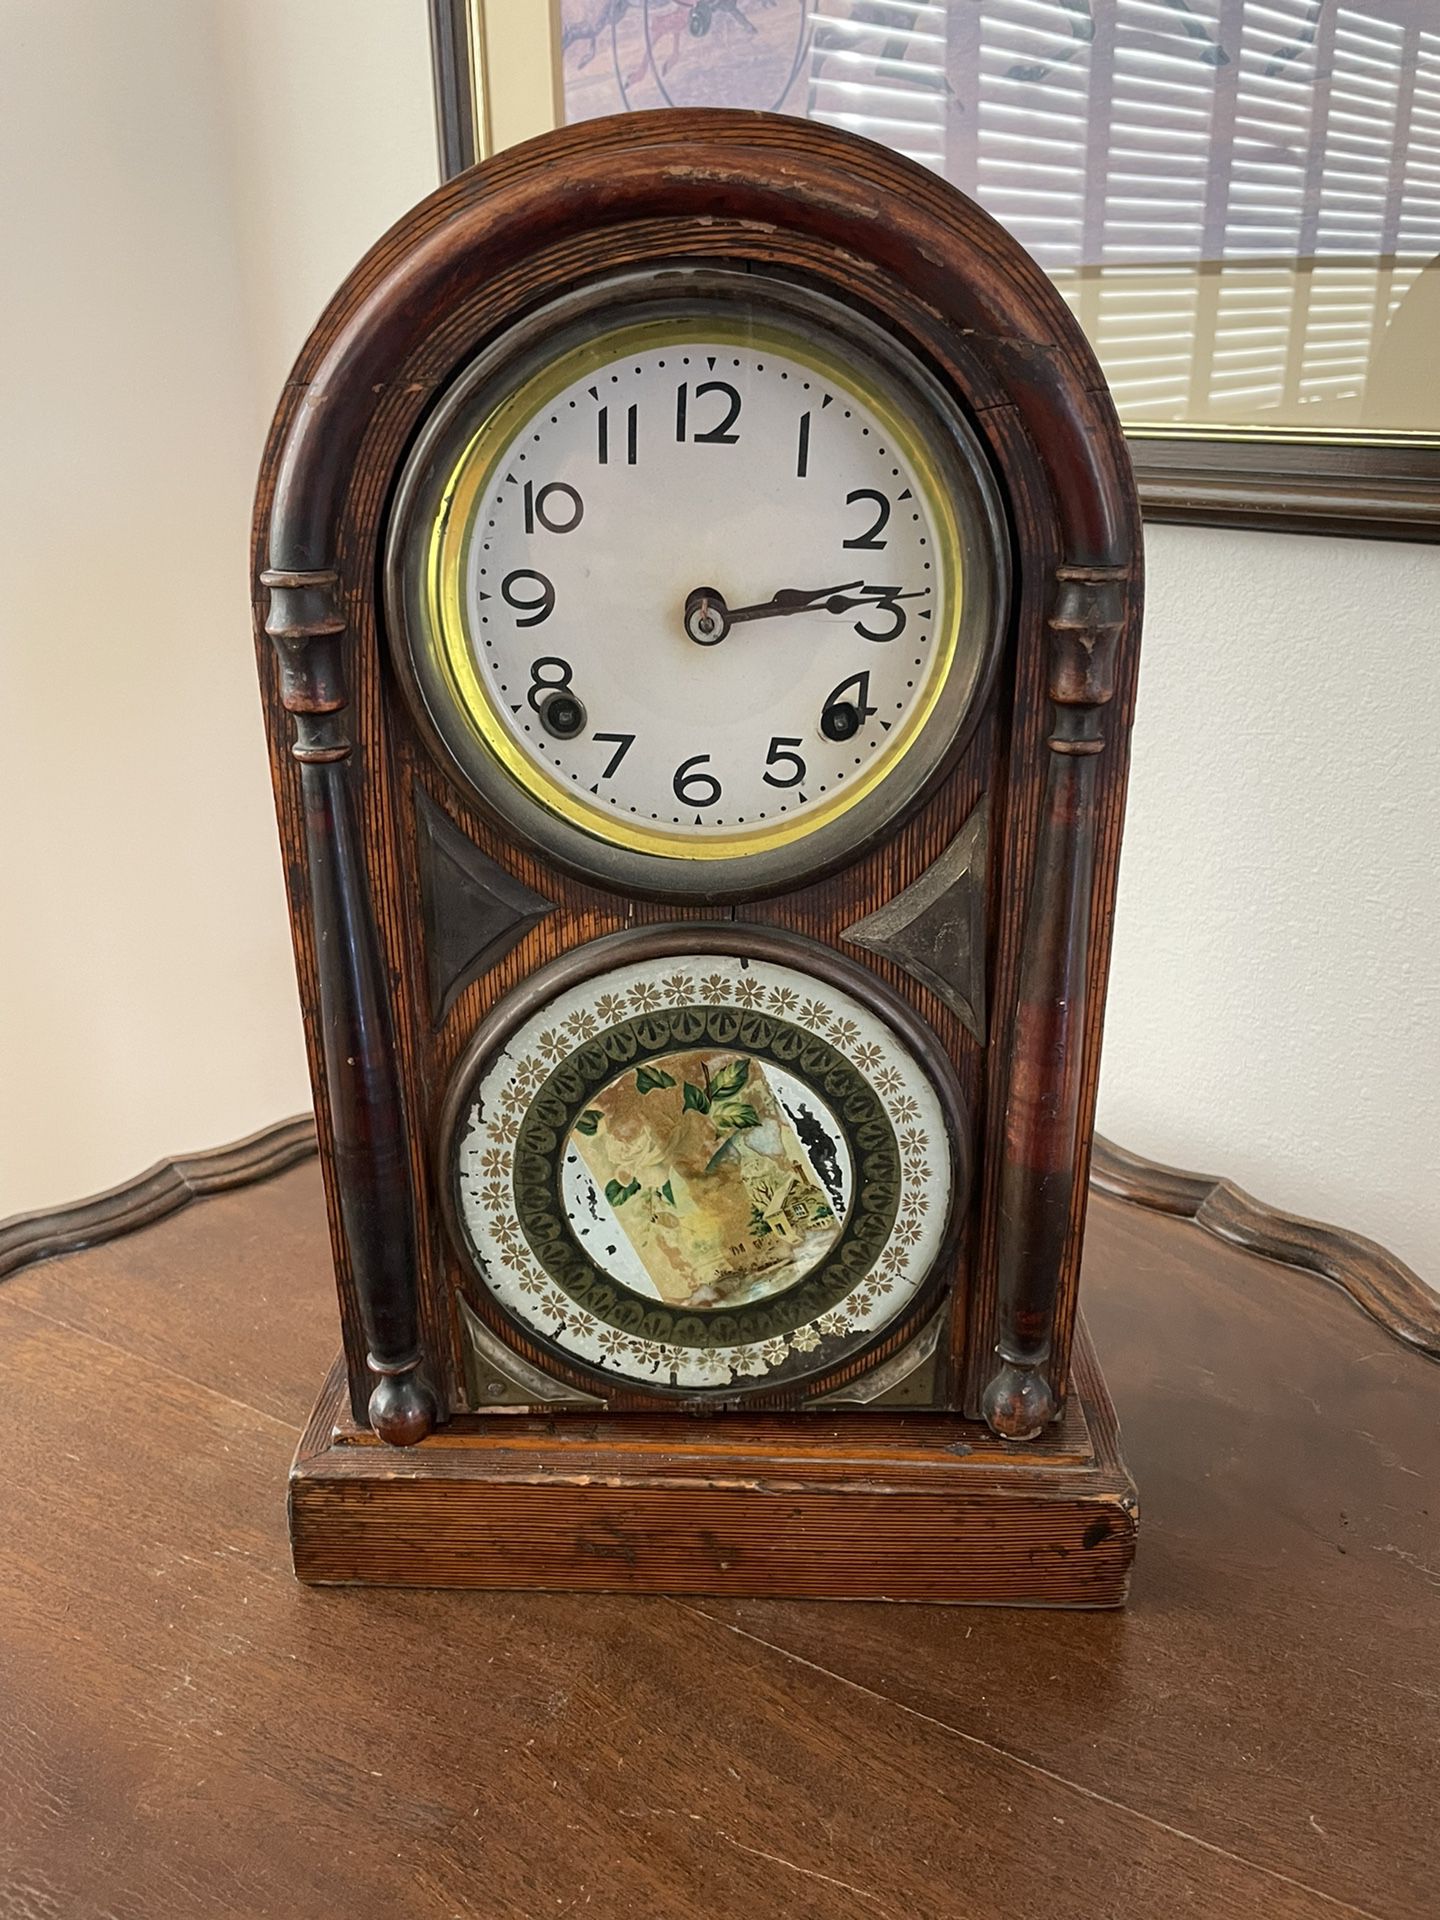 Antique Clock And Key - $50.00